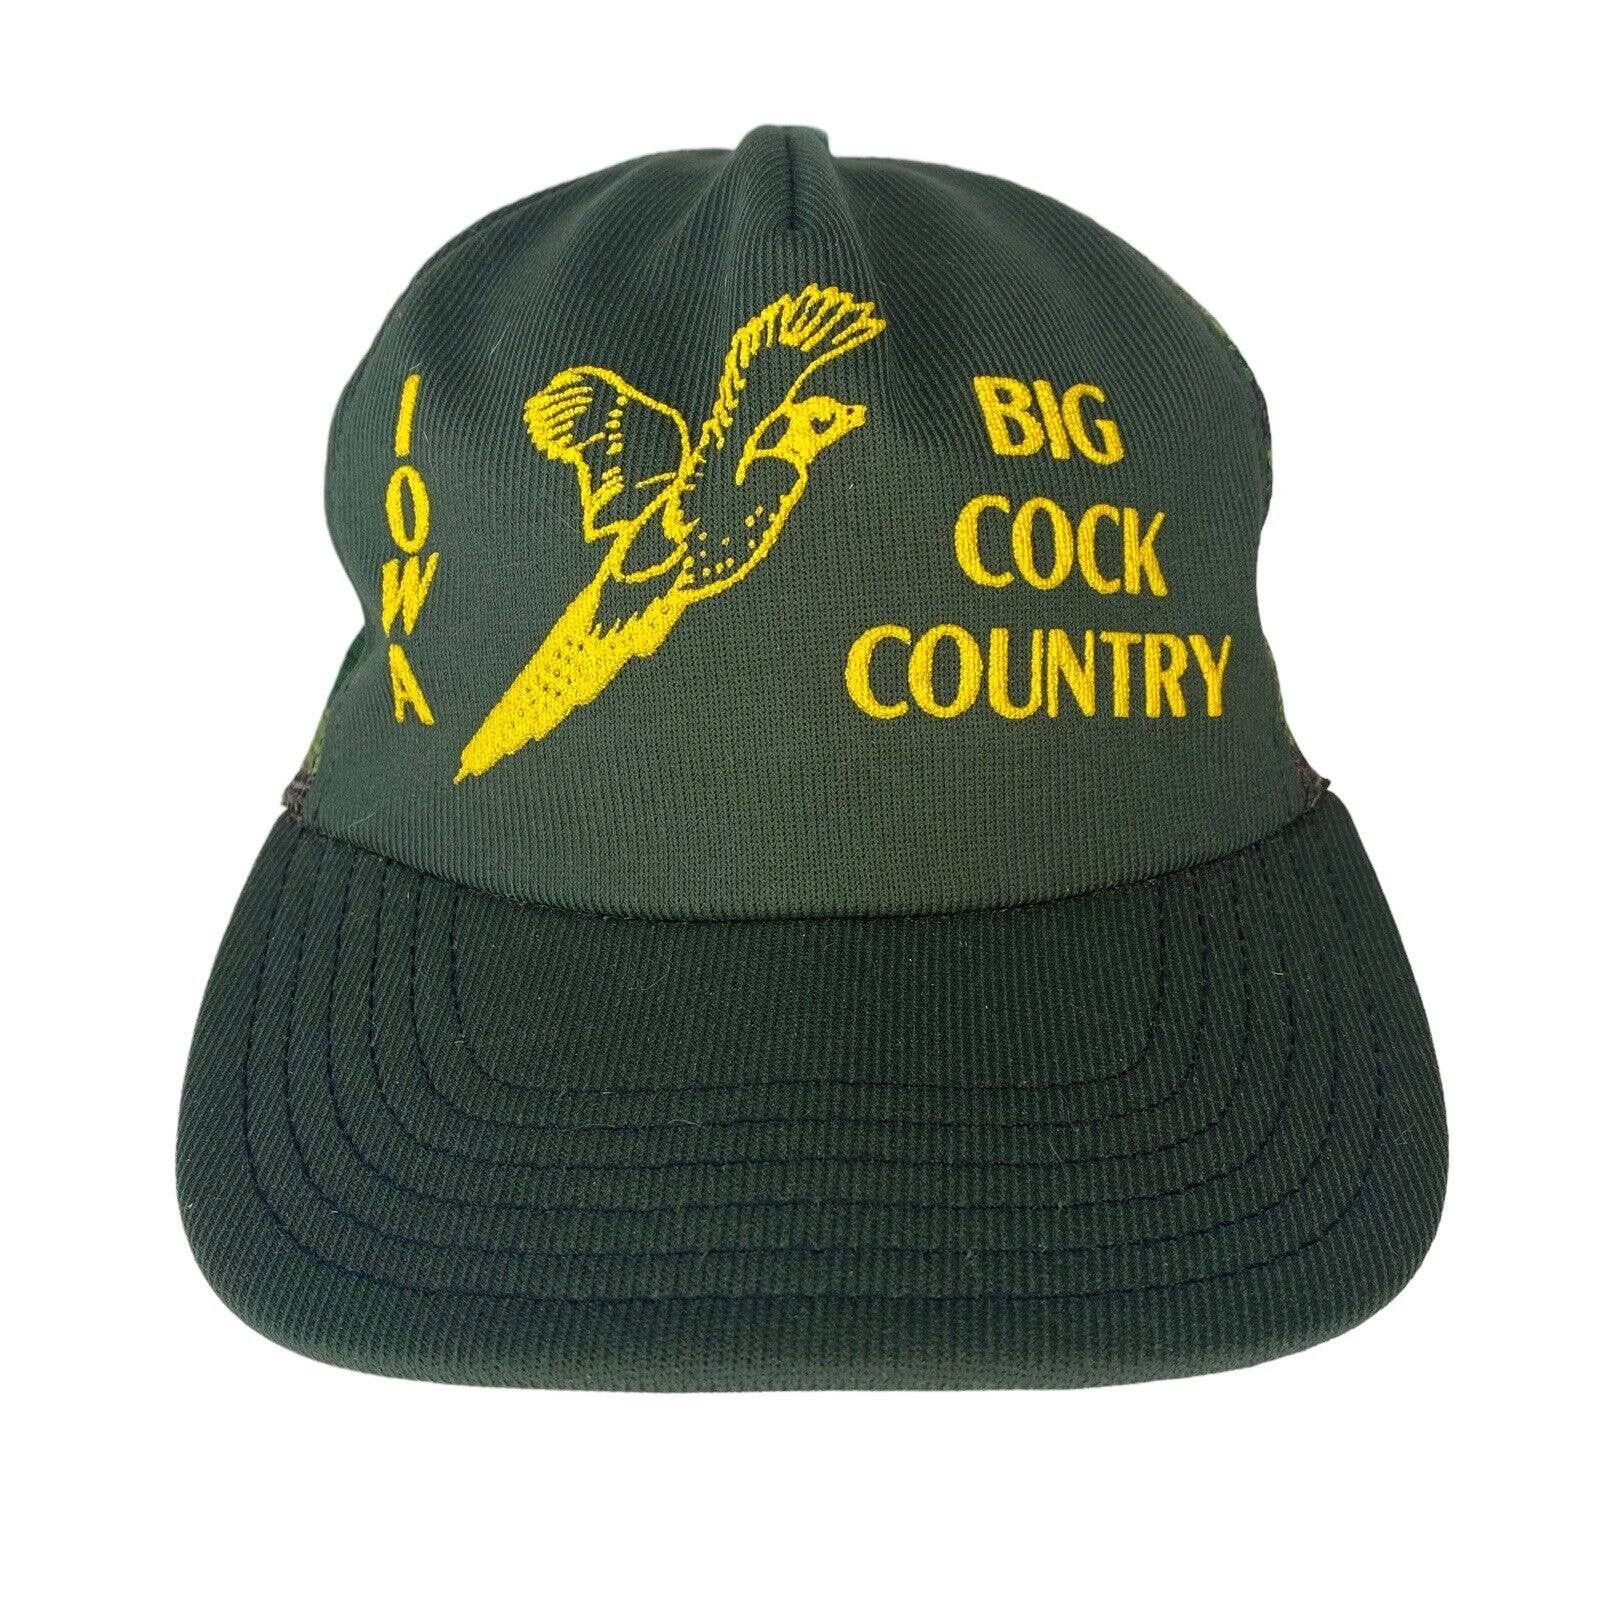 Iowa is Big Cock Country Hat, Trucker H, Mesh Hat, Funny Hats